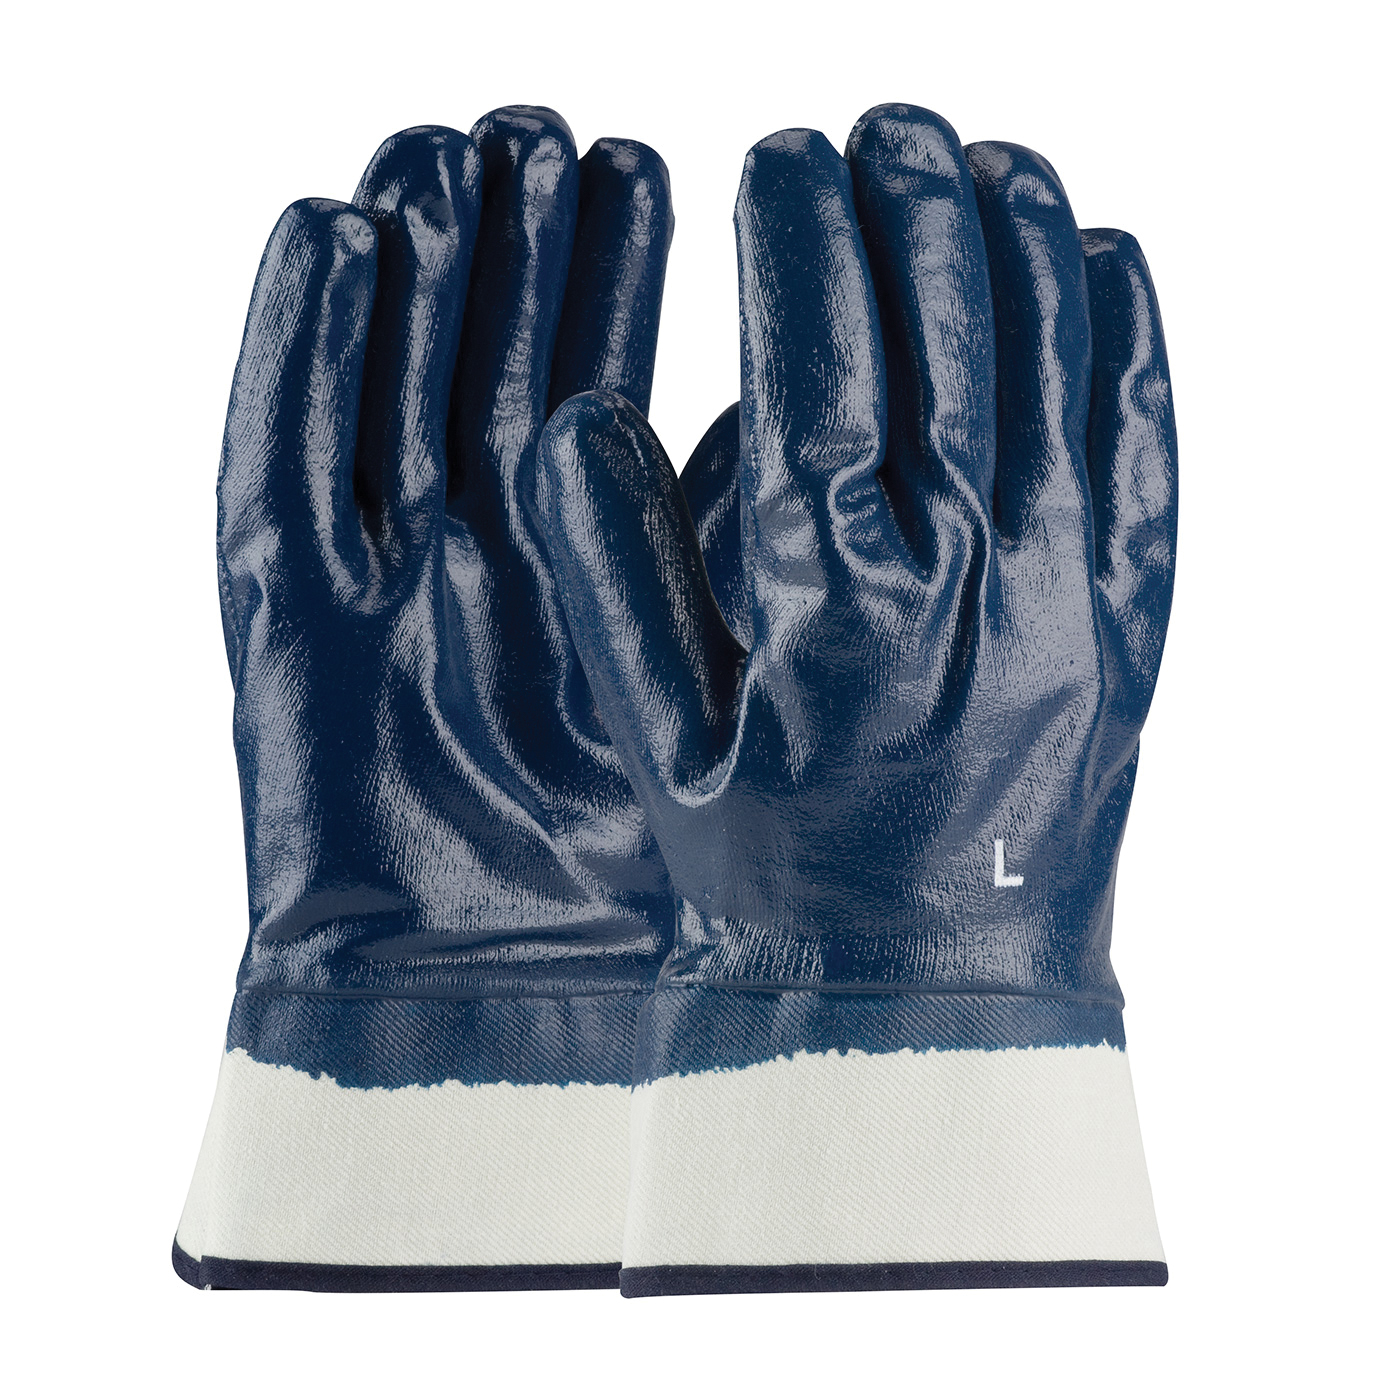 PIP® ArmorTuff® 56-3154/XL Dipped Fully Coated Gloves, XL, Nitrile, Blue, Cotton Jersey Lining, 11 in L, Resists: Grease and Oil, Supported Support, Plasticized Safety Cuff, 0.7 mm THK